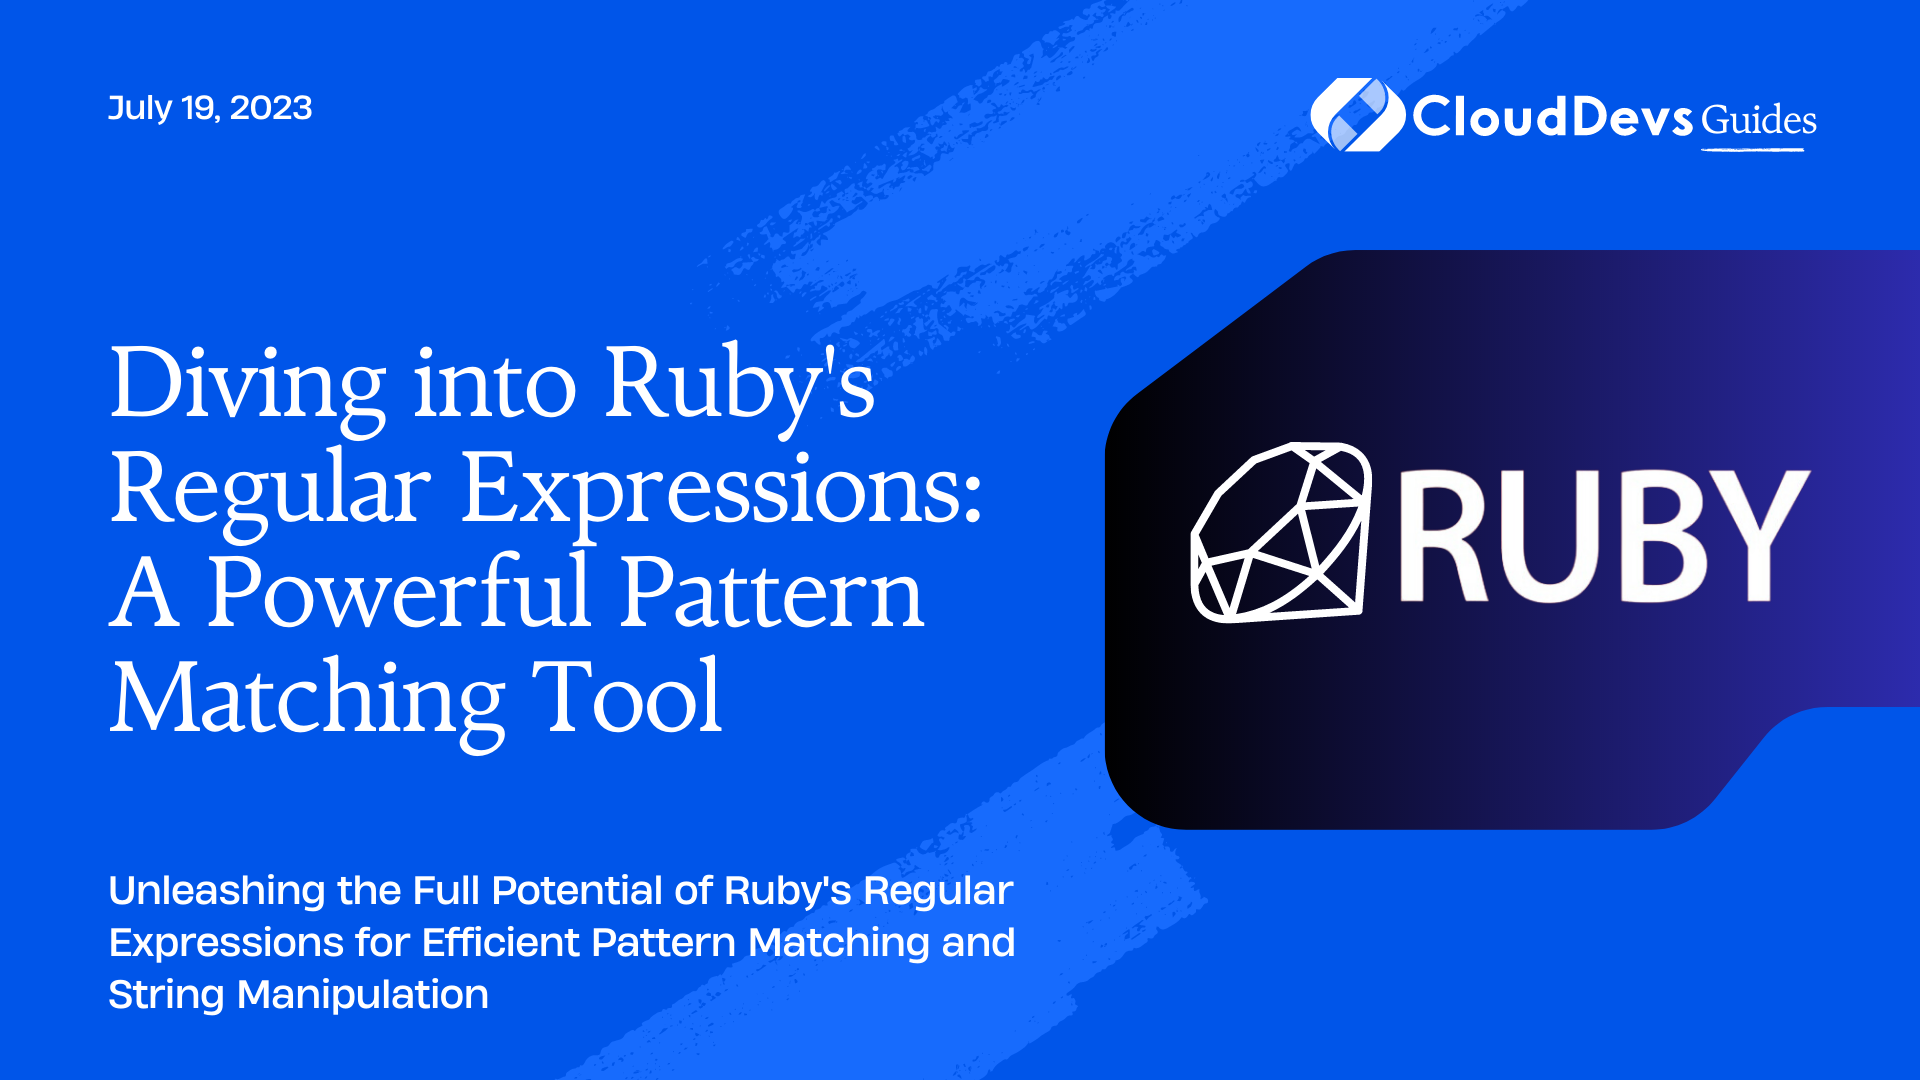 Diving into Ruby's Regular Expressions: A Powerful Pattern Matching Tool